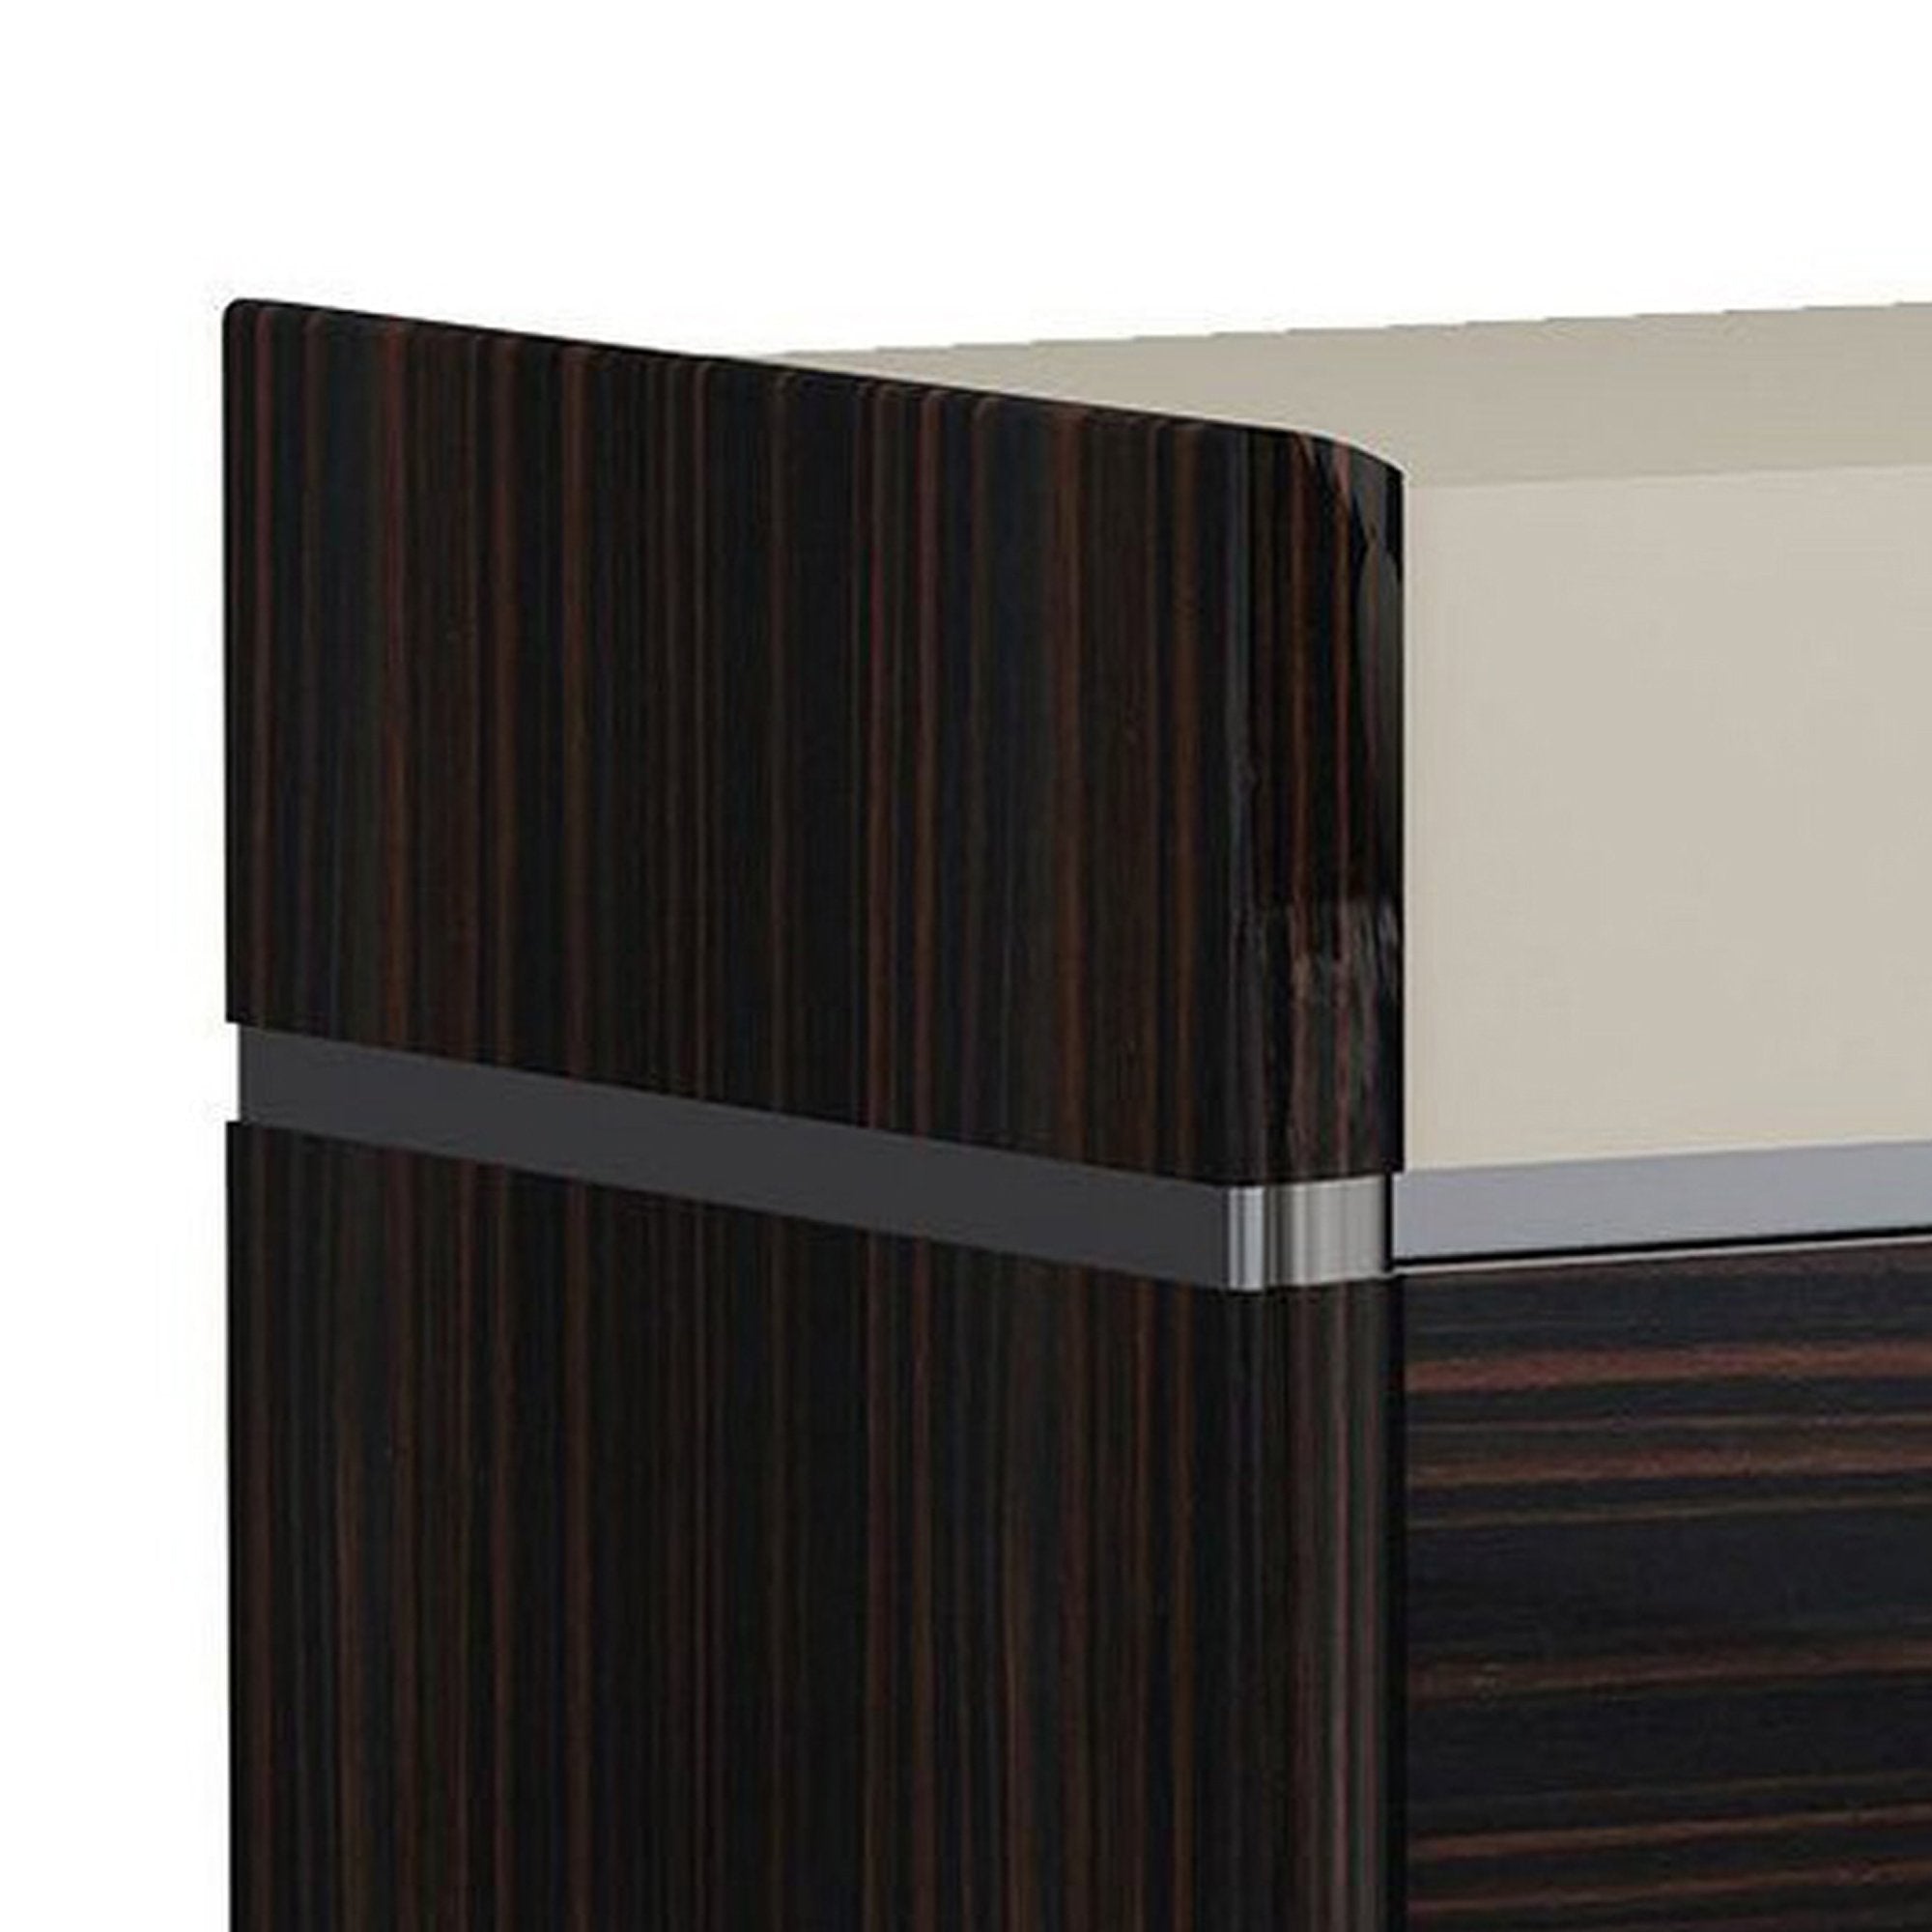 Benzara BM226961 2 Drawer Nightstand with Grain Details and Plinth Base